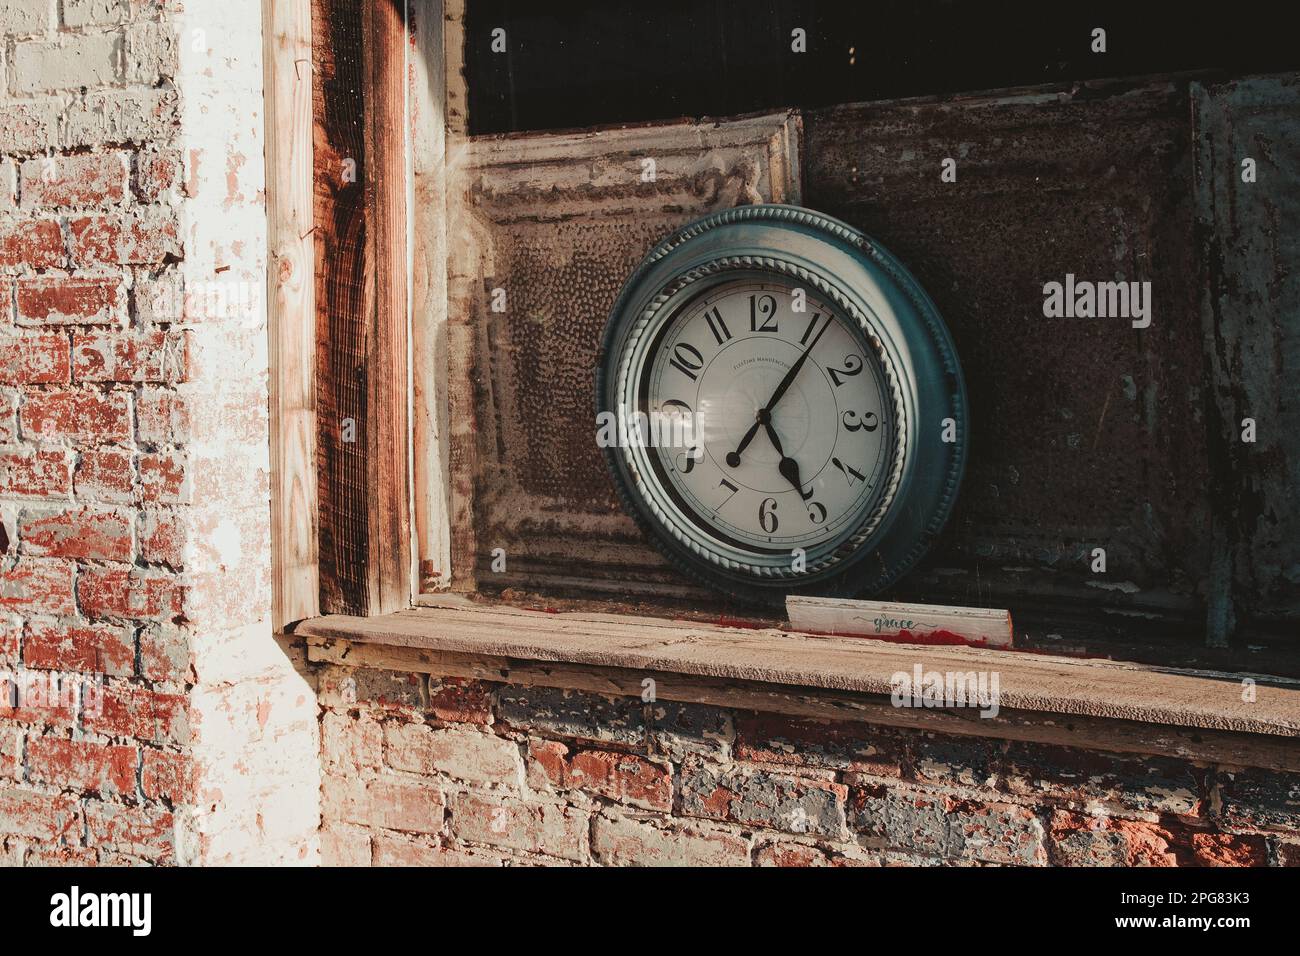 A classic antique pendulum clock mounted on a brick wall in an aged building Stock Photo